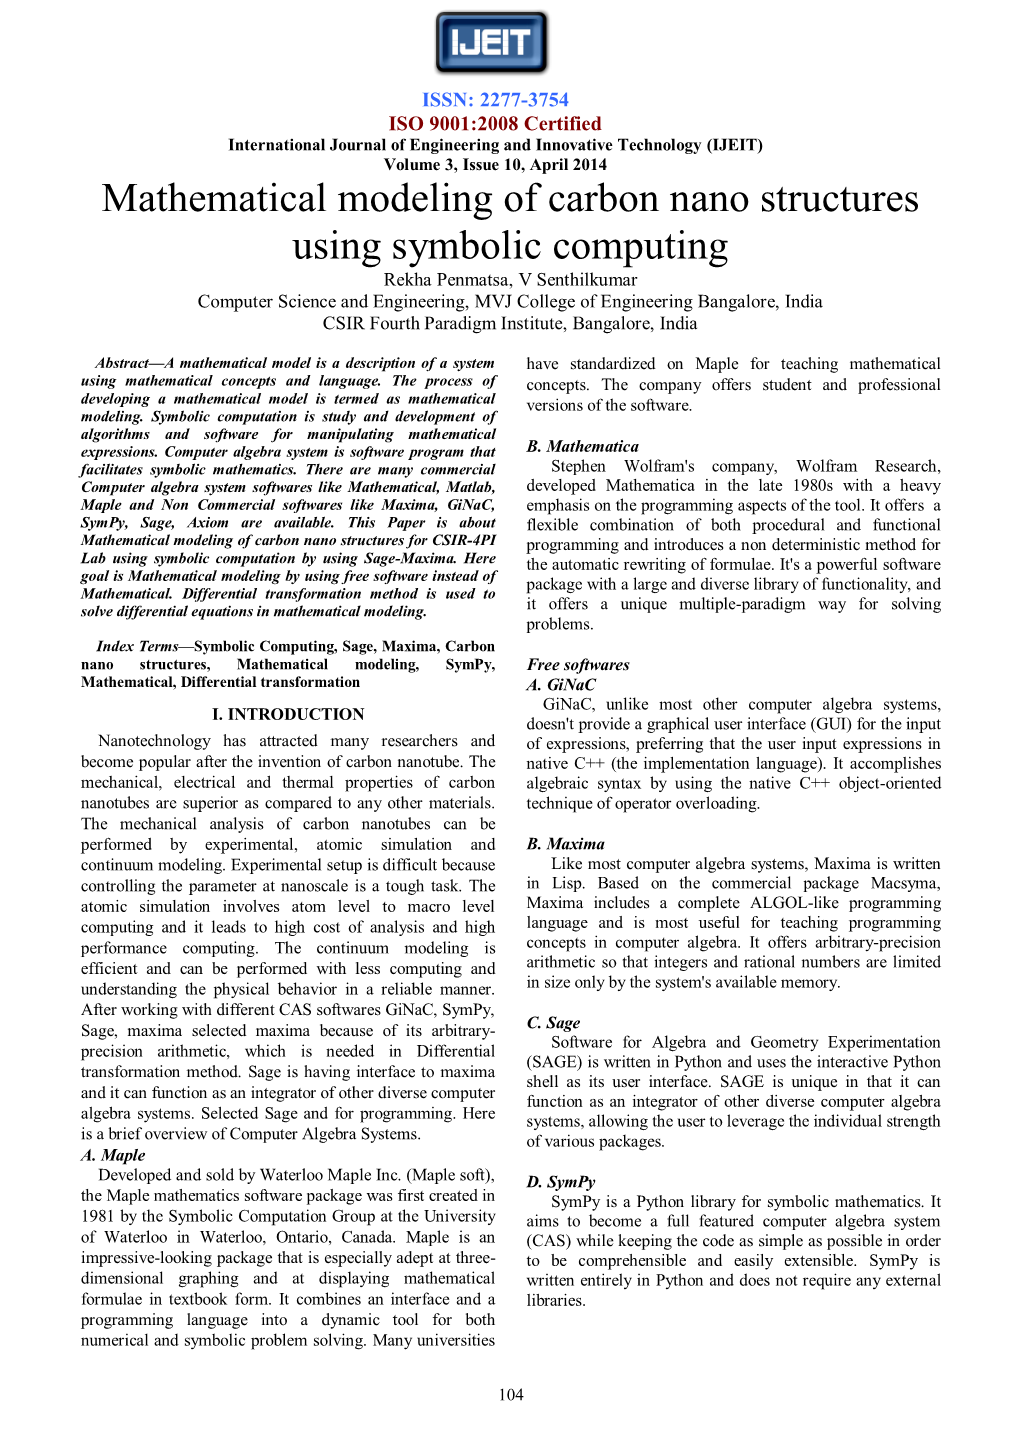 Mathematical Modeling of Carbon Nano Structures Using Symbolic